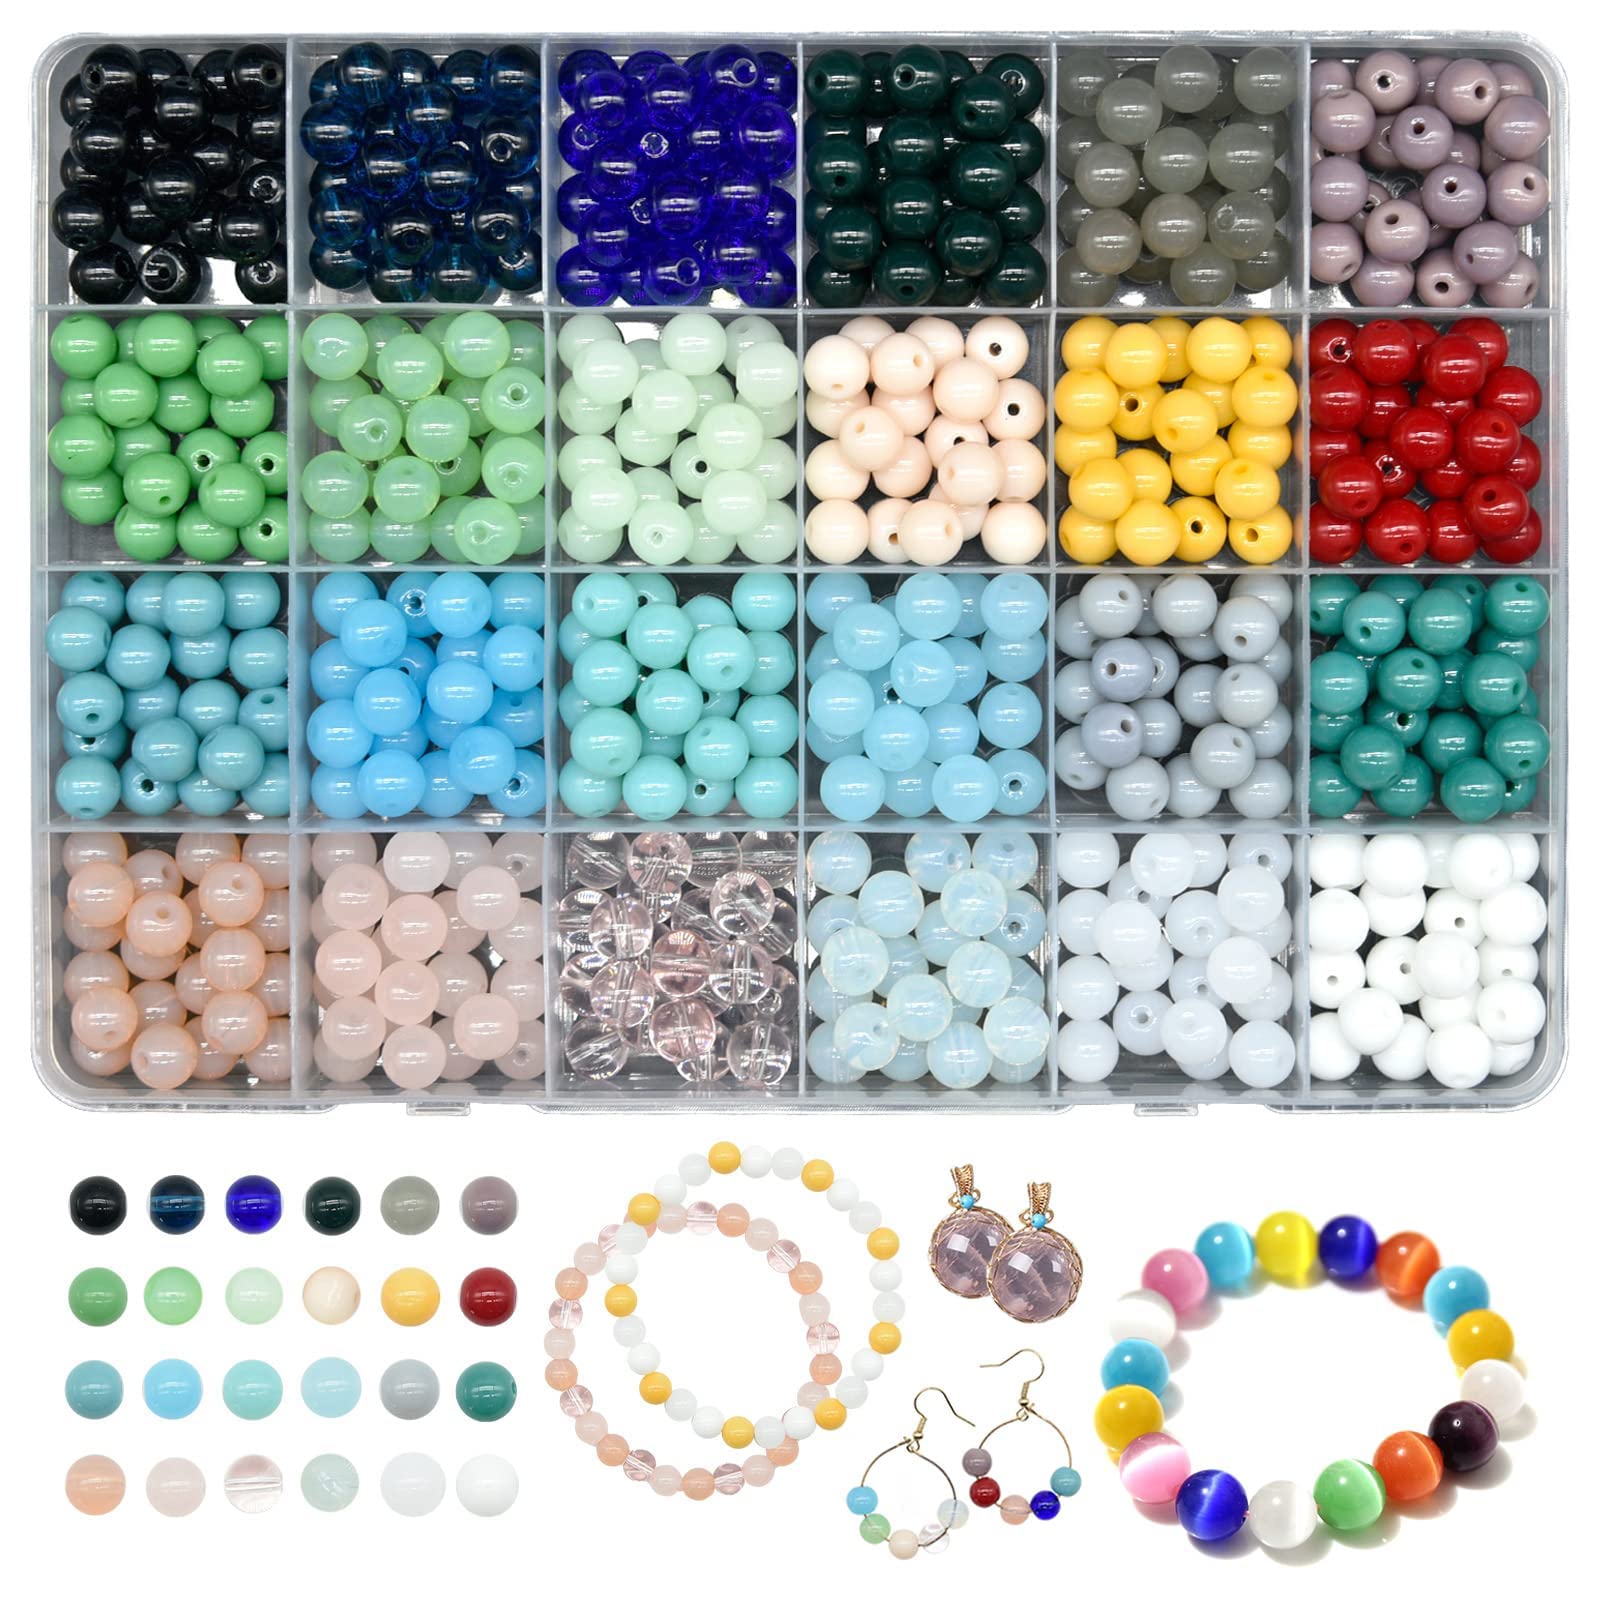 JOJANEAS 8mm Glass Beads for Jewelry Making, 24 Colors Gradient Gemstone  Beads Crystal Beads Bracelet Making Kit DIY Round Beads Assorted Cute Beads